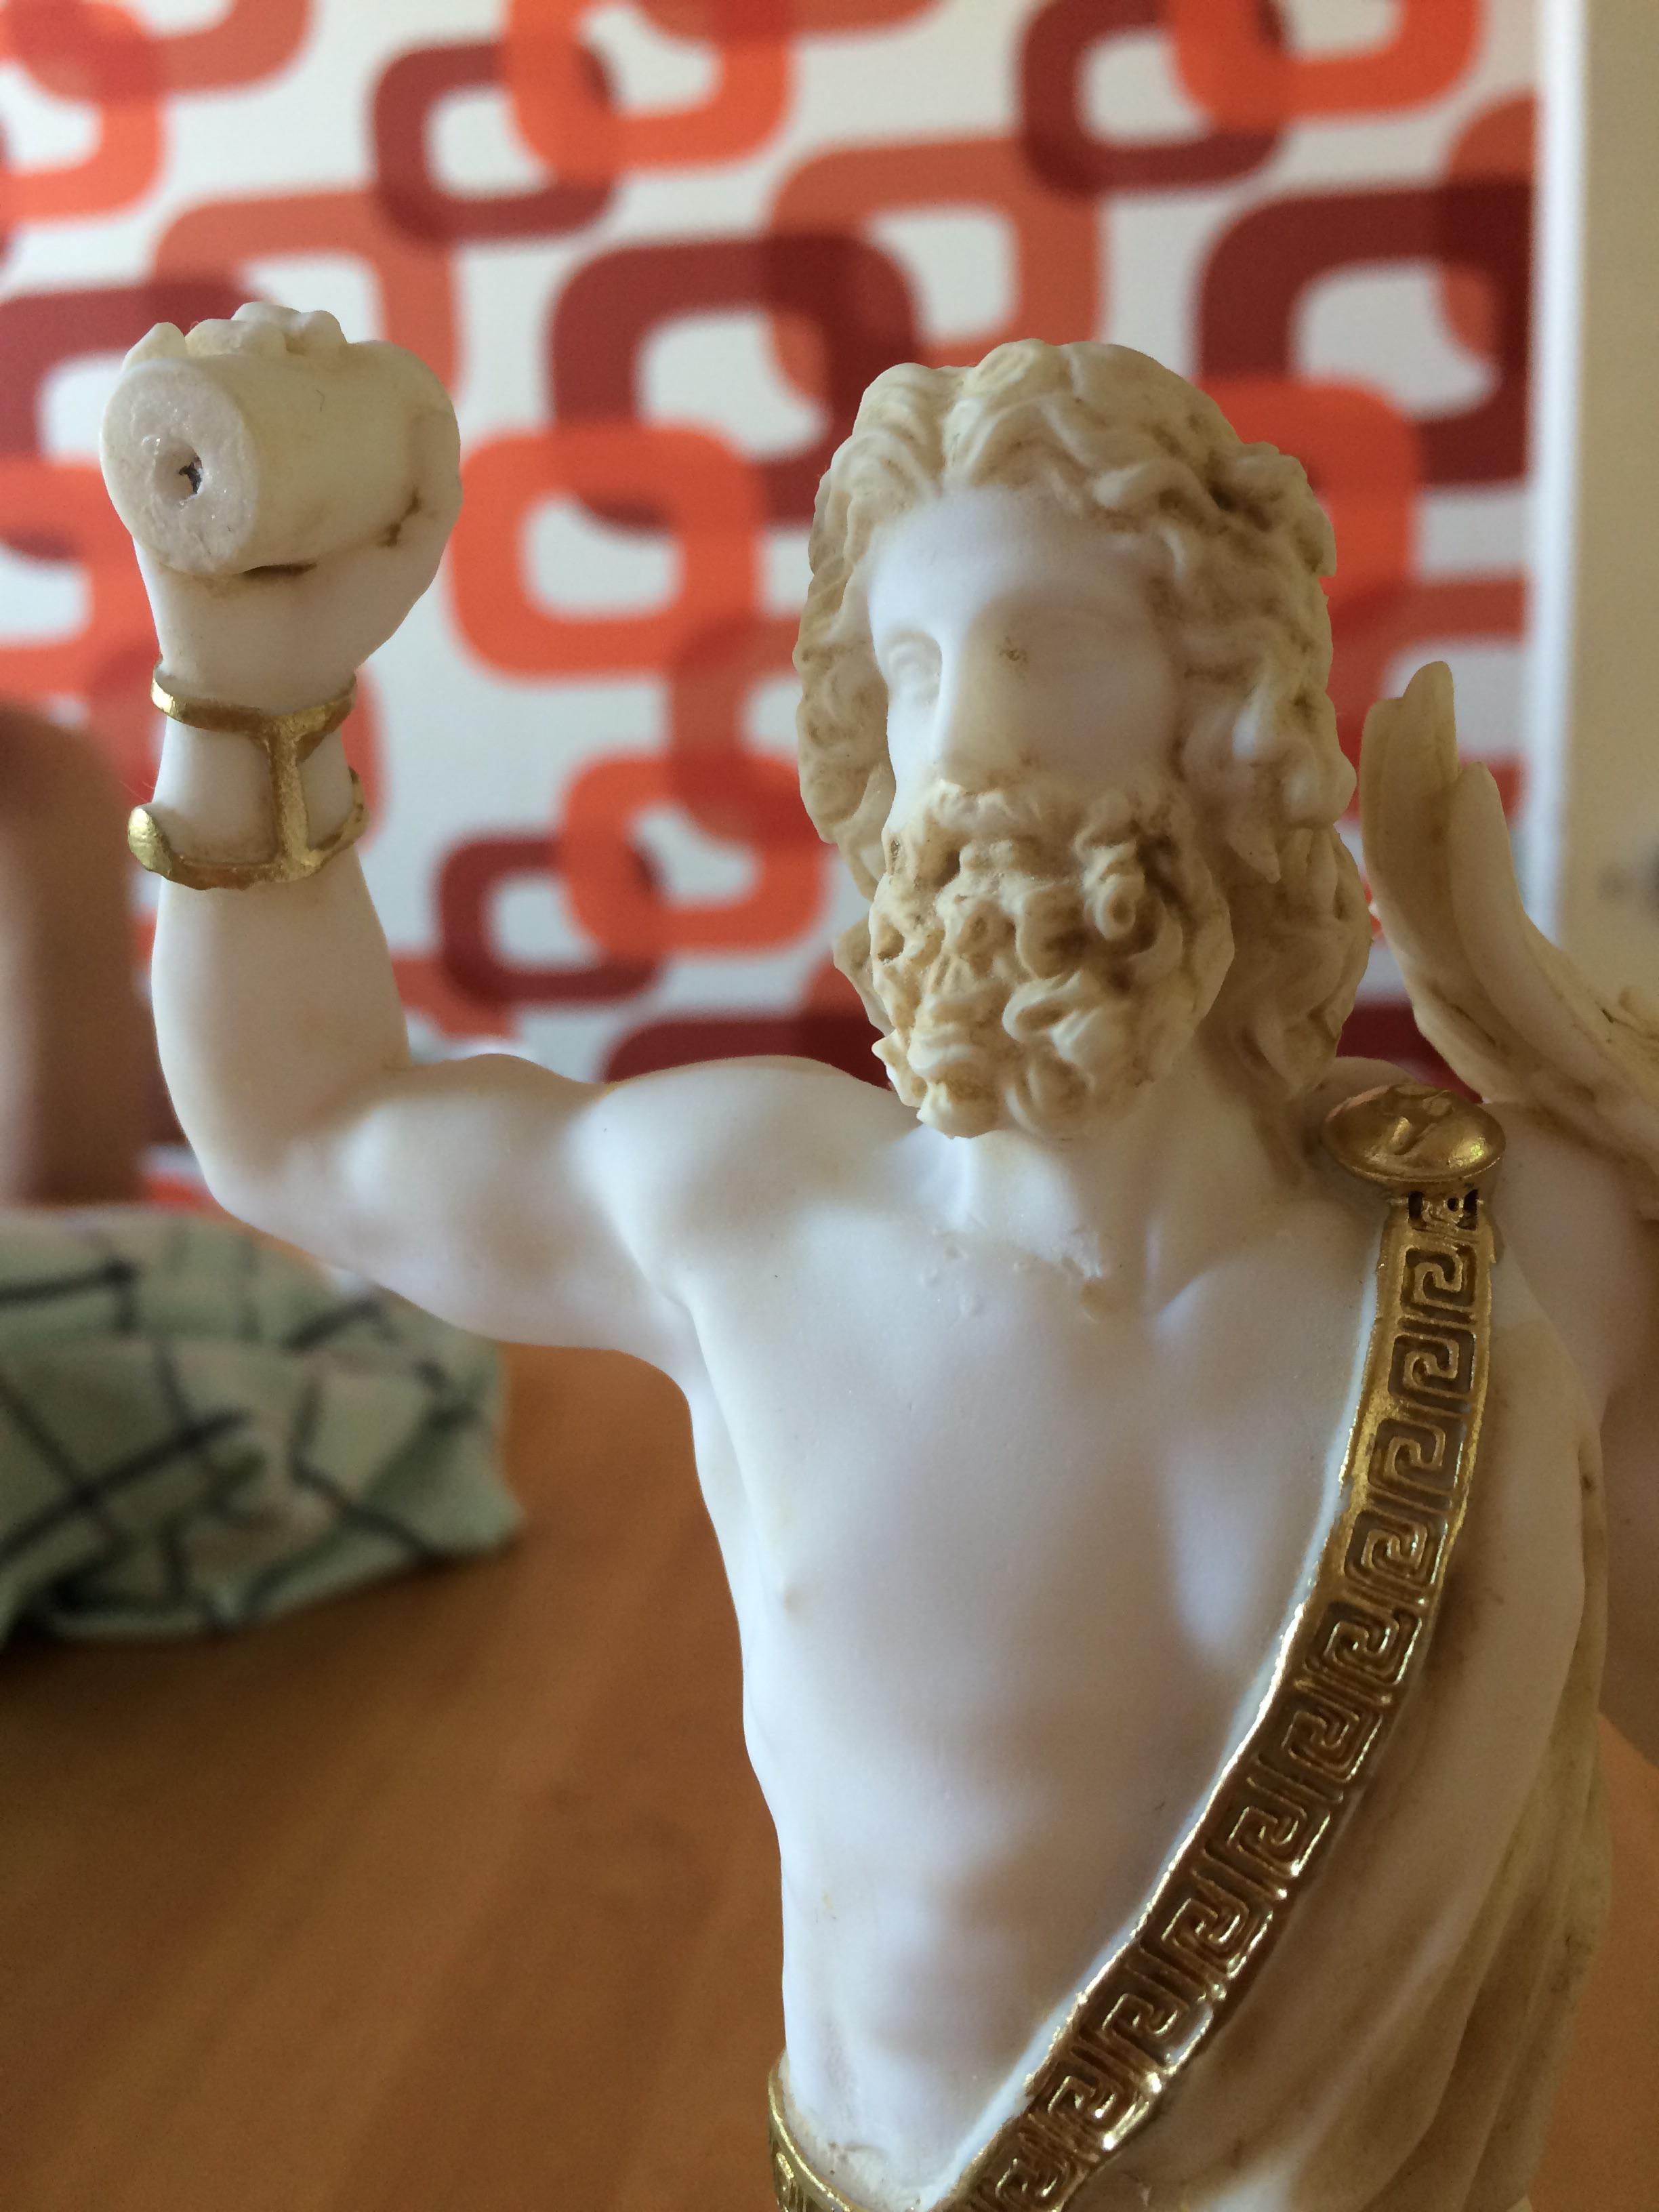 My statue of zeus broke and now it looks like zeus is throwing a roll of toilet paper at someone..